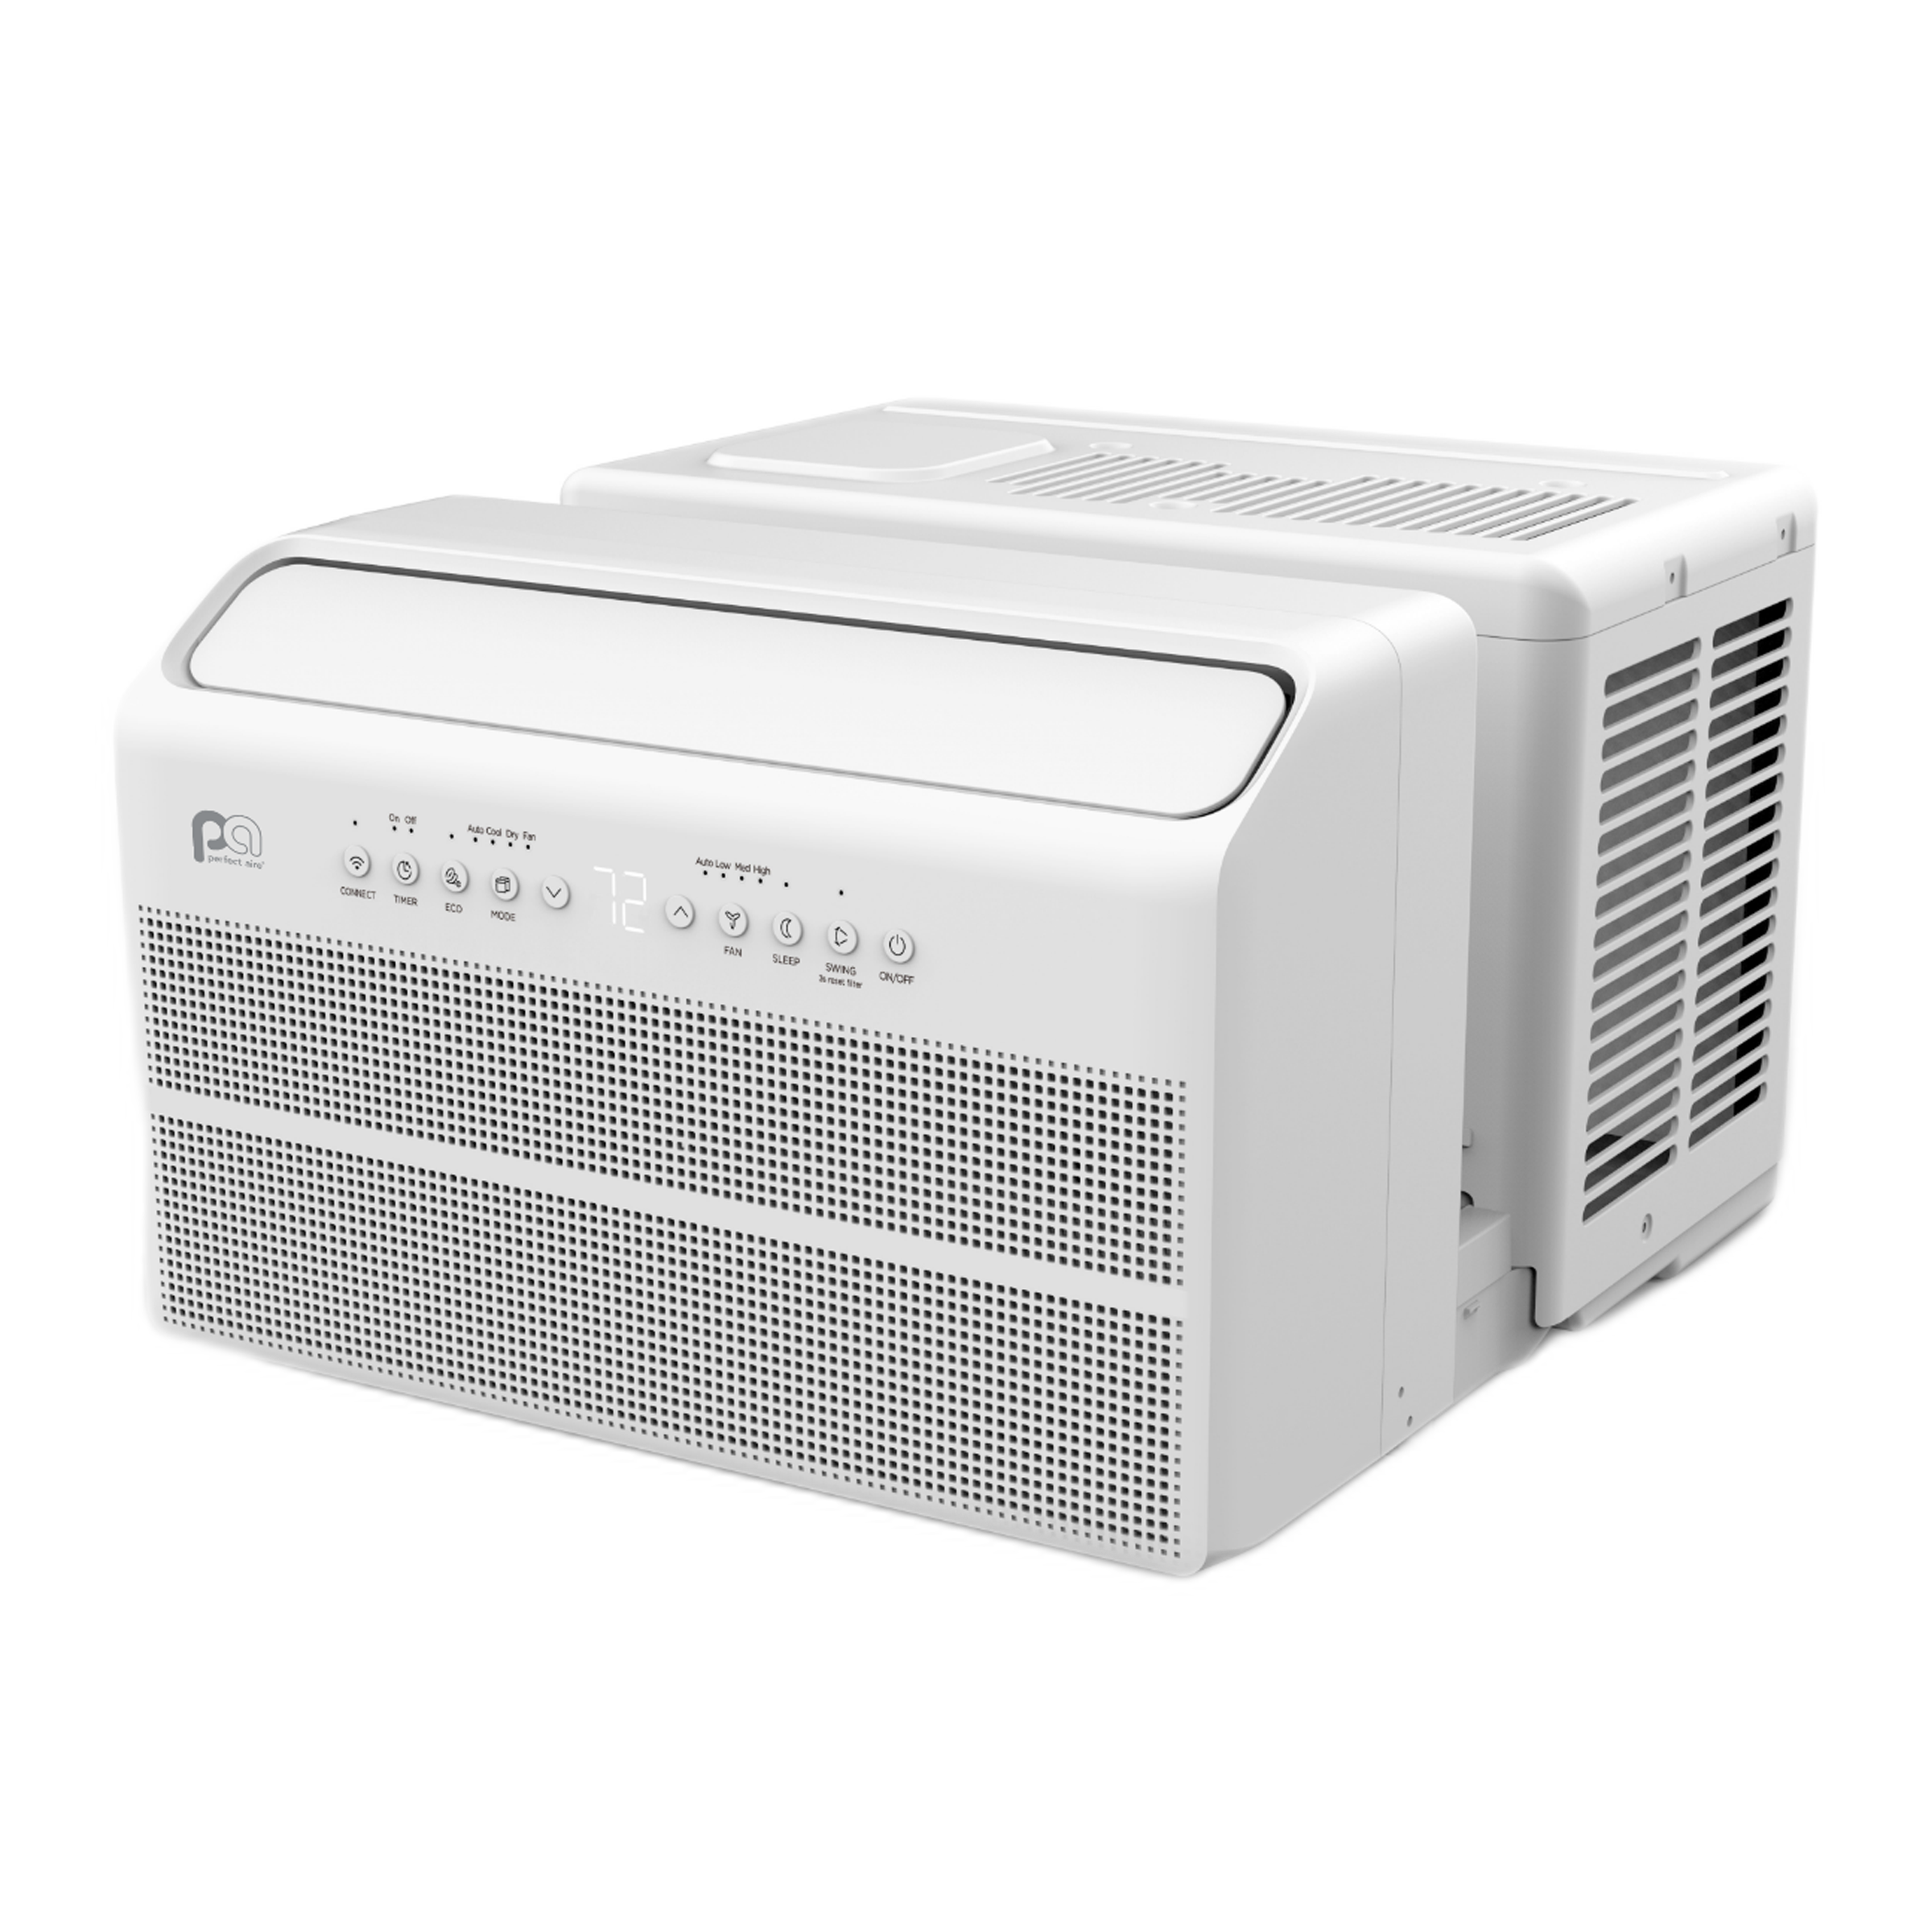 1PACU8000 Perfect Aire 8,000 BTU Energy Star U-Shaped Inverter Window Room Air Conditioner, Sq. ft: 350 Coverage with Wireless Smart Controls & Remote Control, R32 Refrigerant, 115V